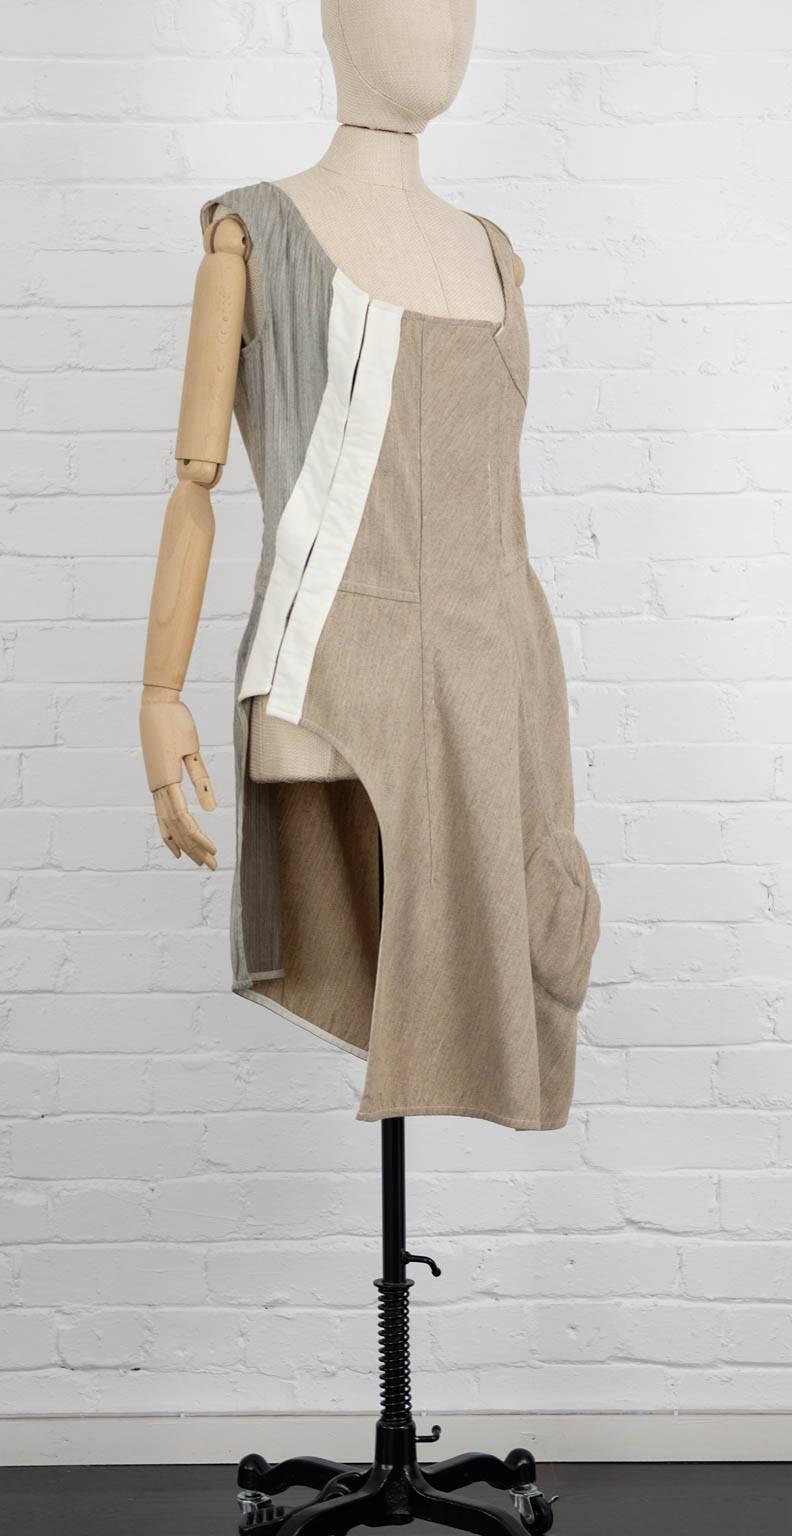 Sand linen and wool blend asymmetrical dress from Comme Des Garçons Vintage featuring a square neck, a sleeveless design, a fitted waist, a side slit, an asymmetric style, a knee length, padded detailing. Fall 1998